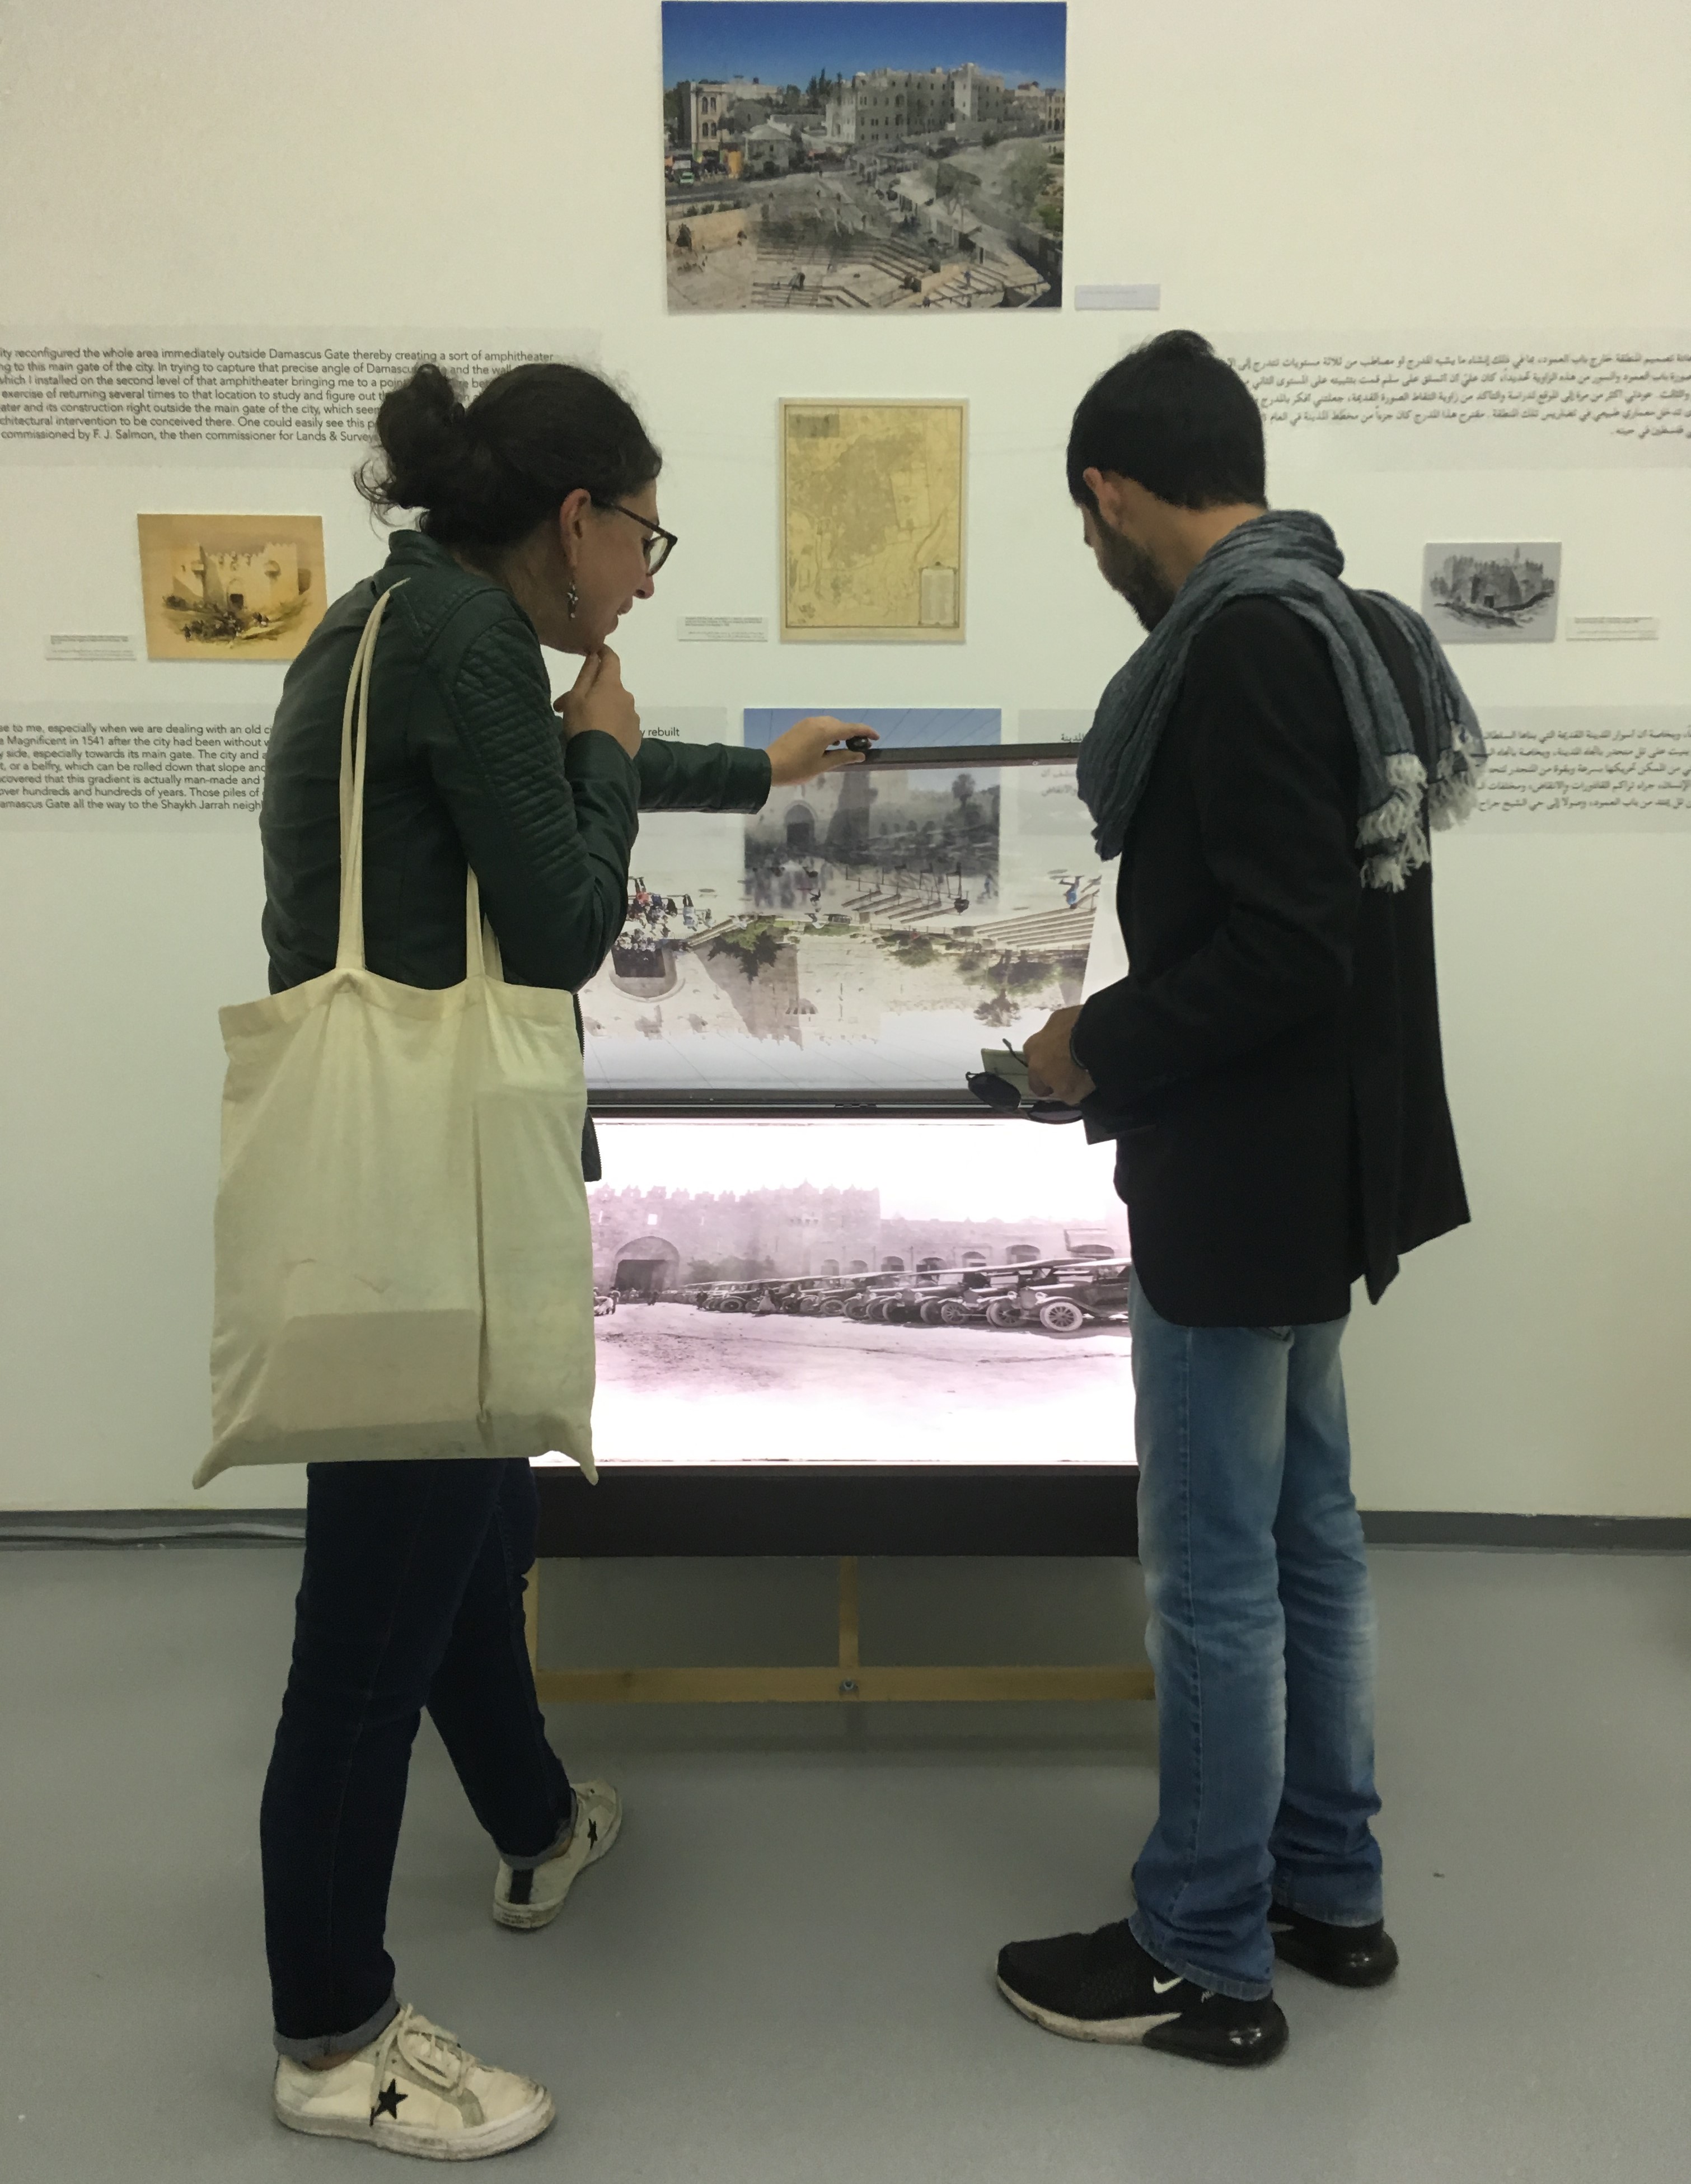 Birzeit University Museum. October 2019. Silvia and a friend at the inauguration of an exhibition ‘Past Tense’, curated by Jack Persekian, looking at overlays of old and new photographs of Jerusalem.